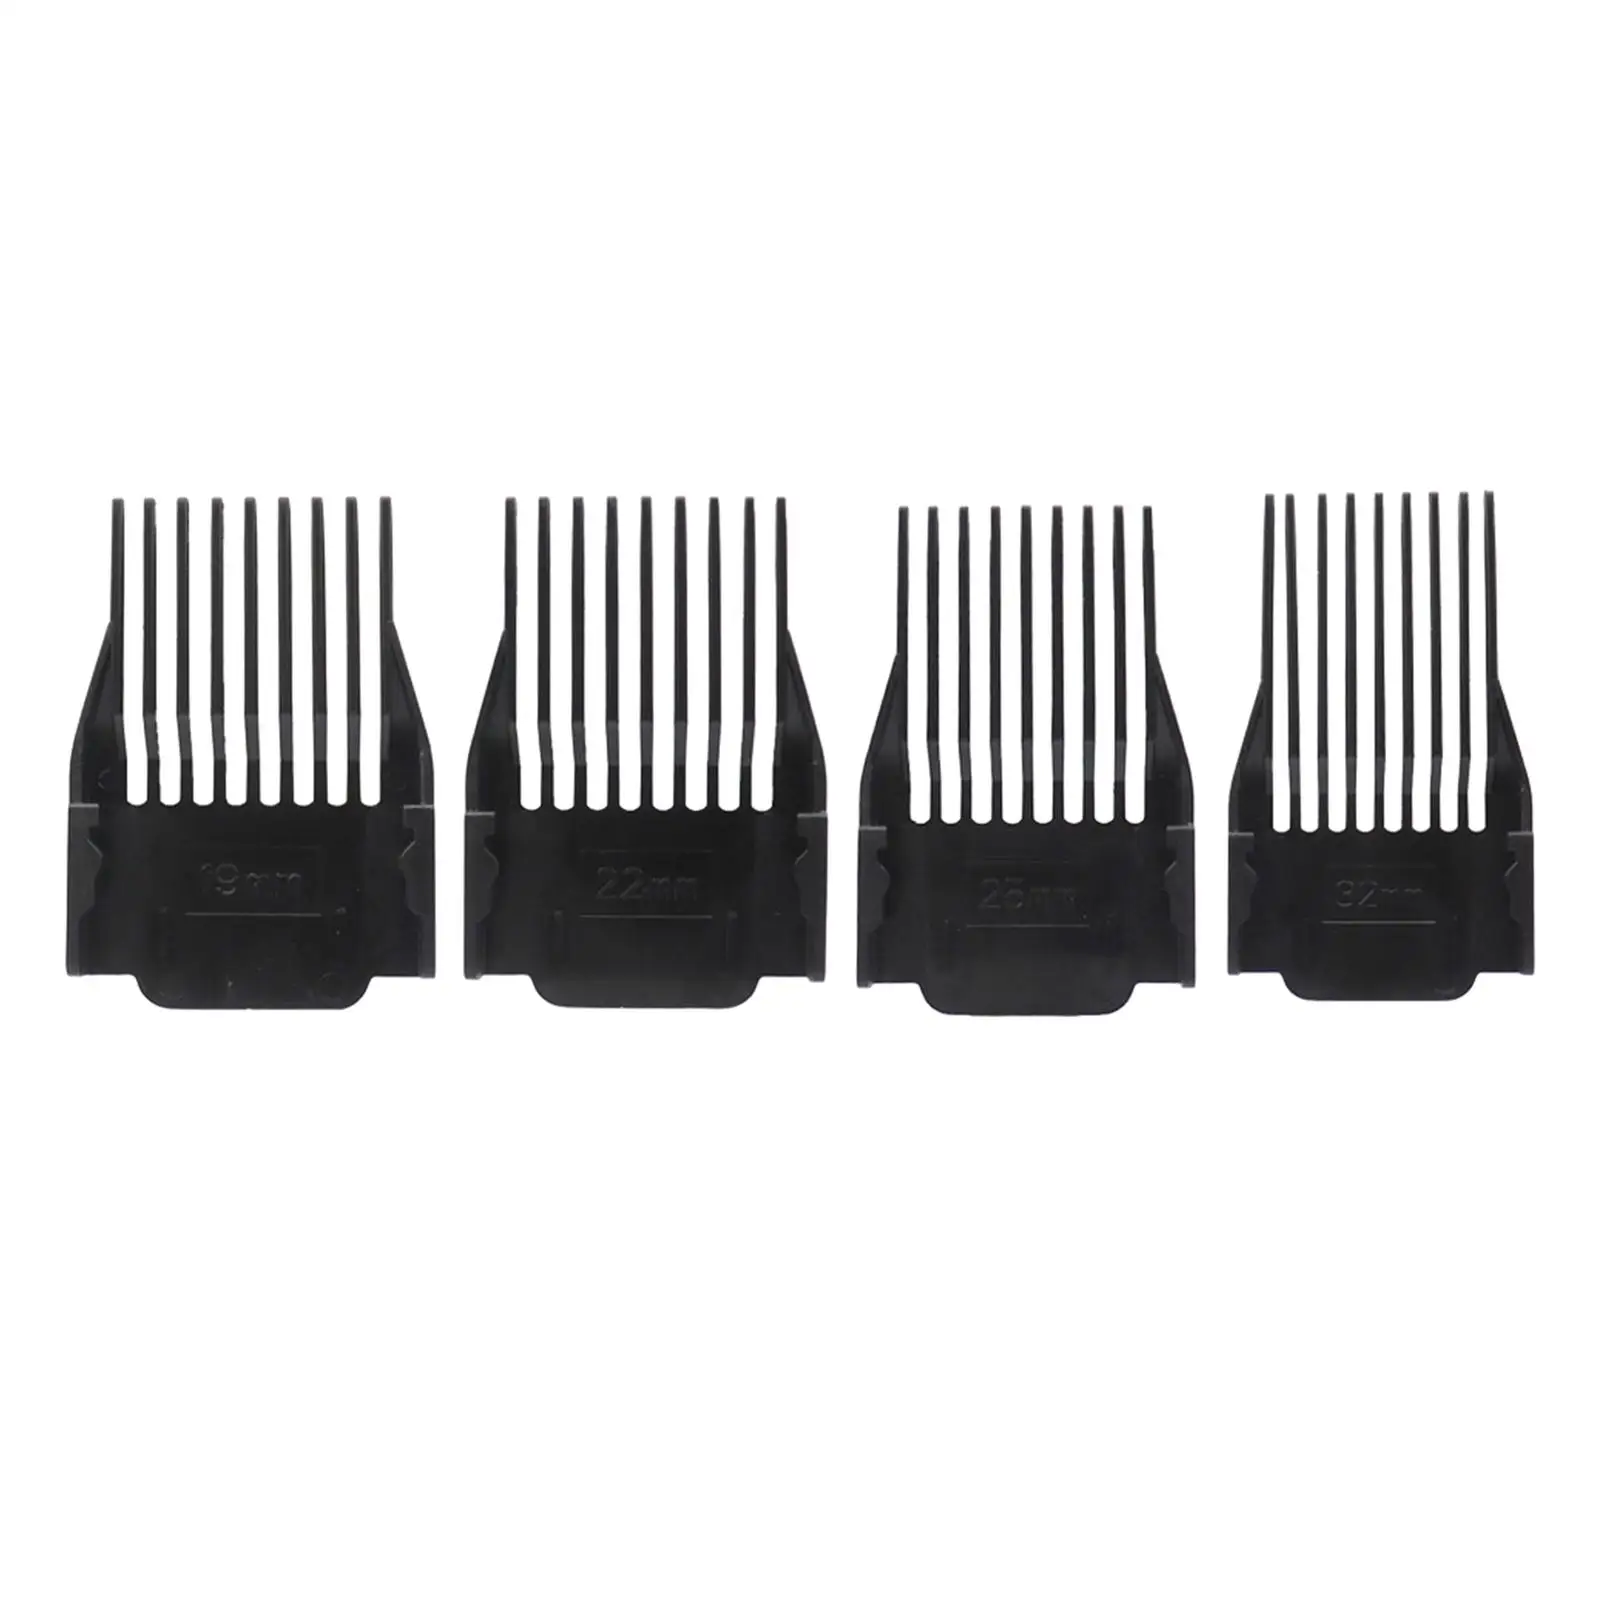 4 Pieces Hair Clipper Guide Combs Cutting Guides Combs Universal Hair Clipper Guard Combs for Attachment Hair Clippers/Trimmers